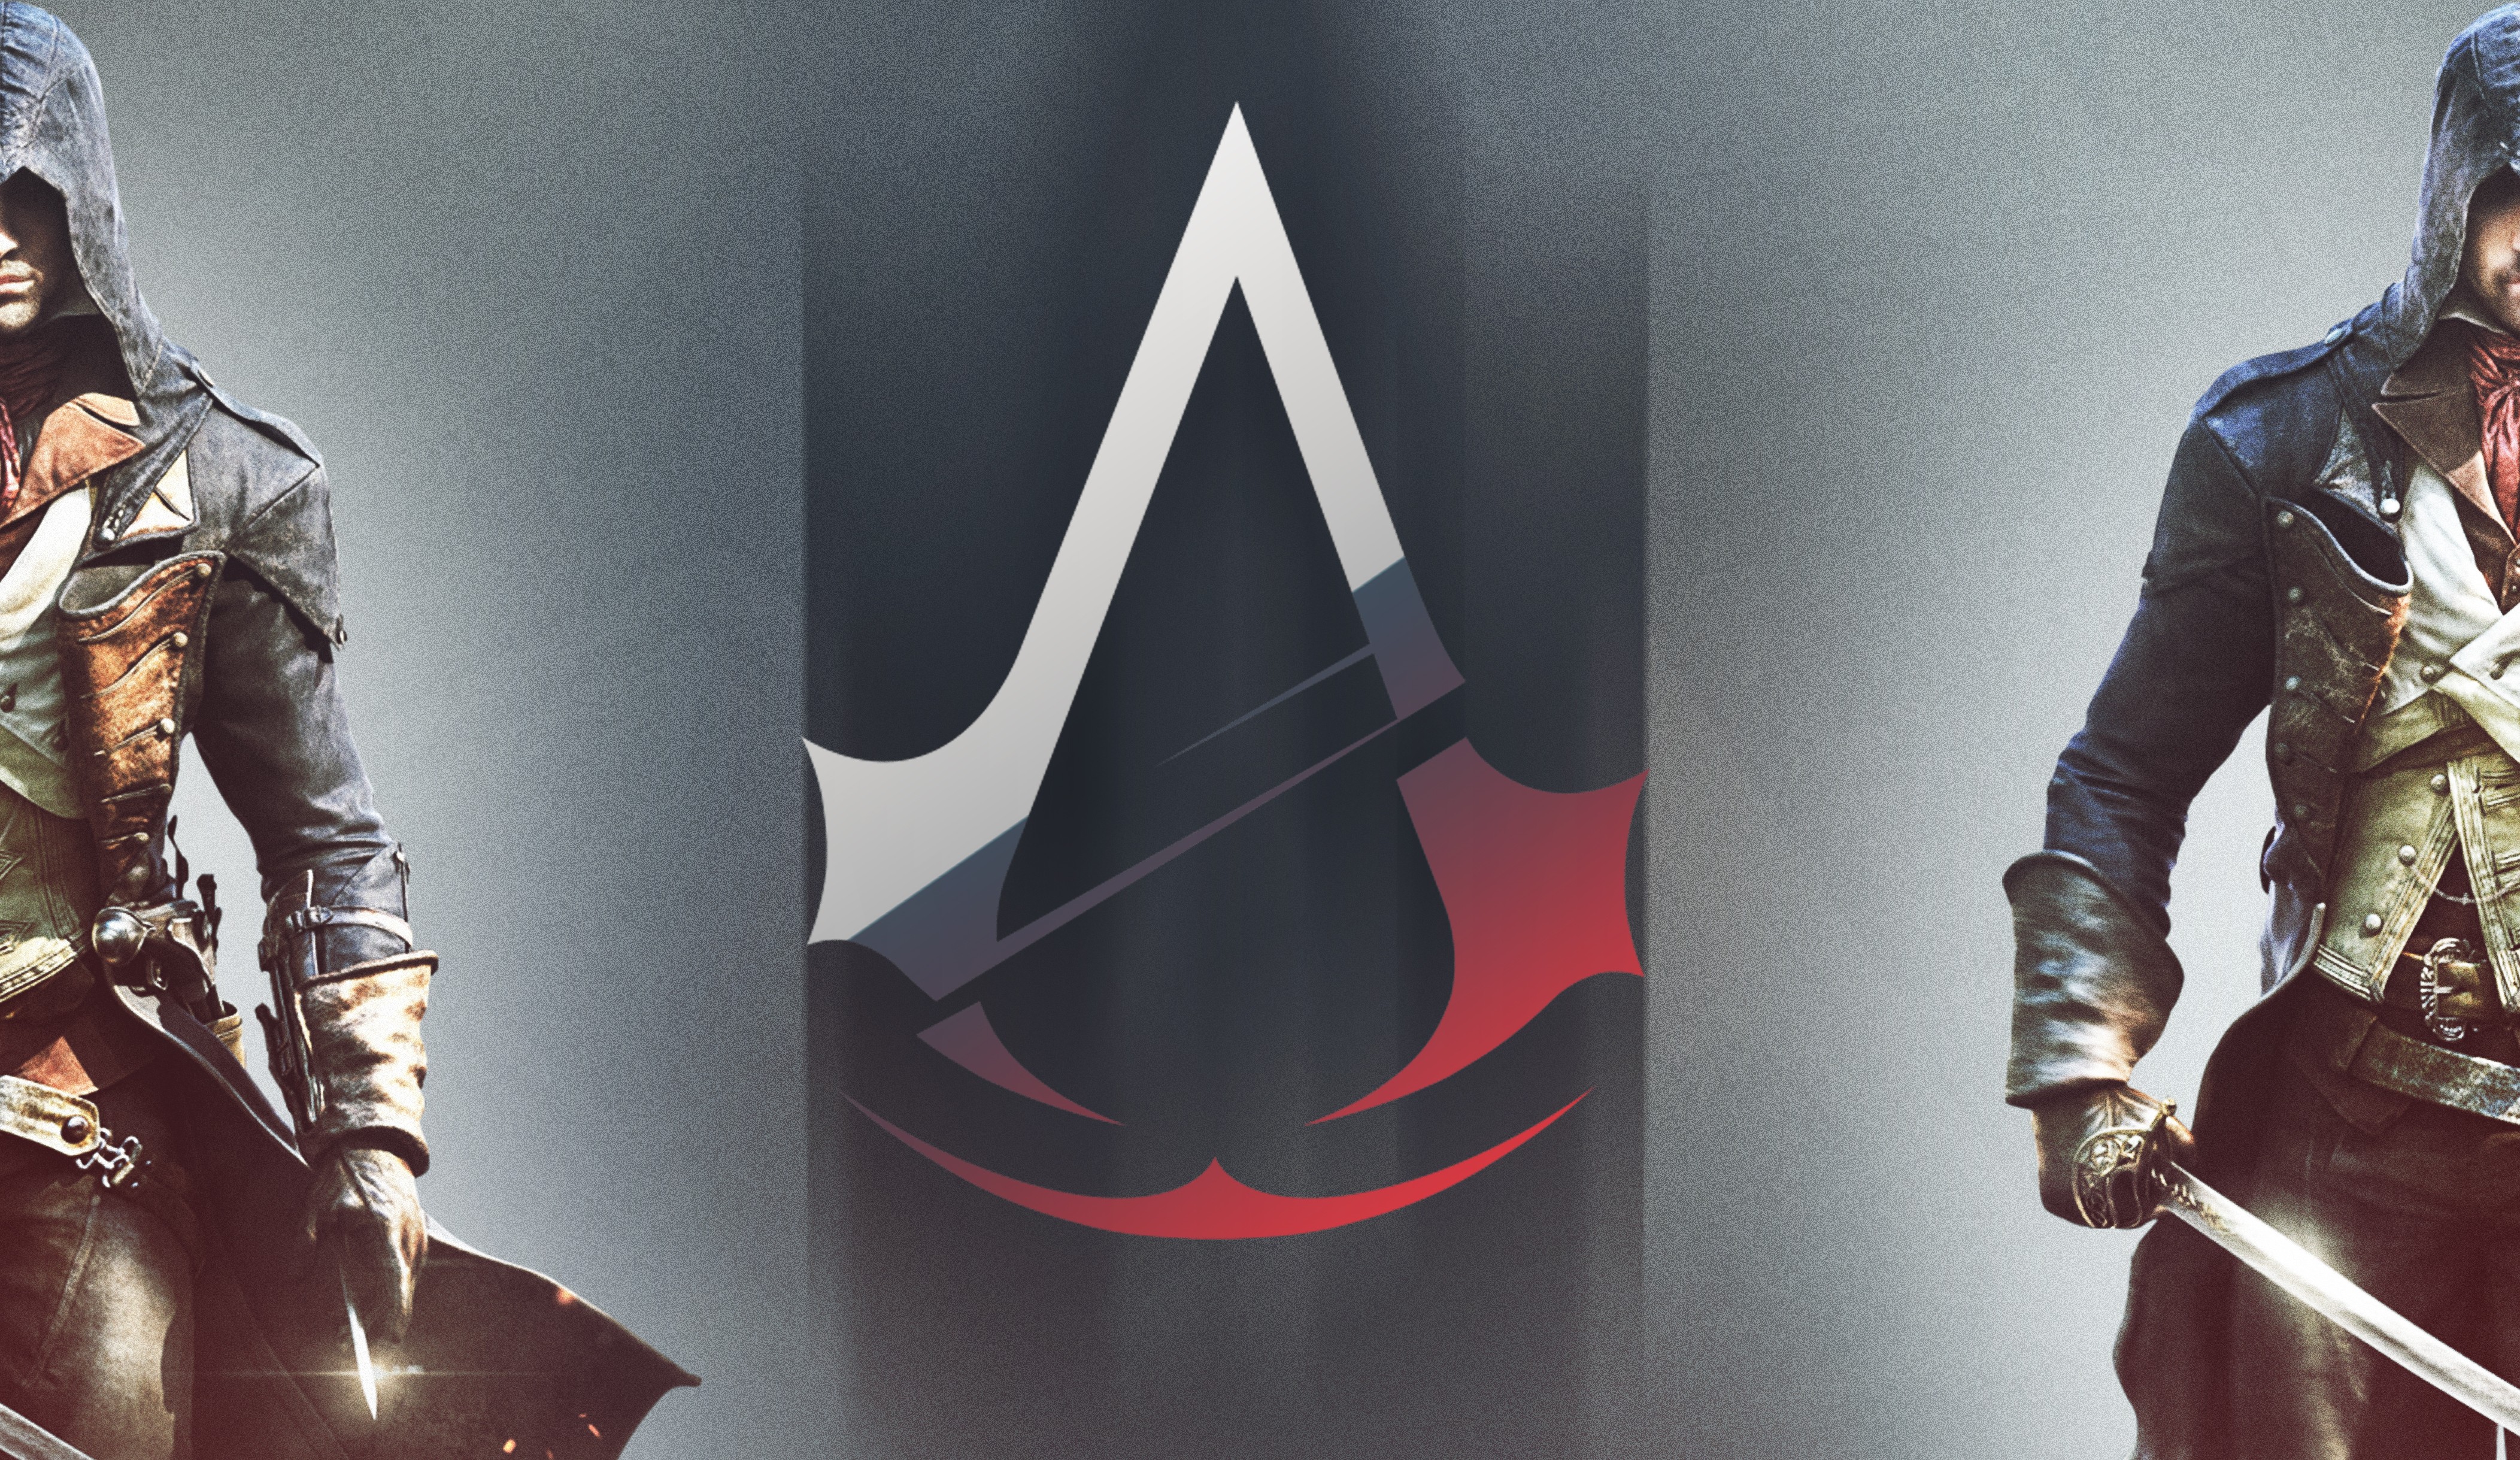 General 4209x2438 Assassin's Creed Arno Dorian Assassin's Creed: Unity video games PC gaming video game art hoods video game men Ubisoft